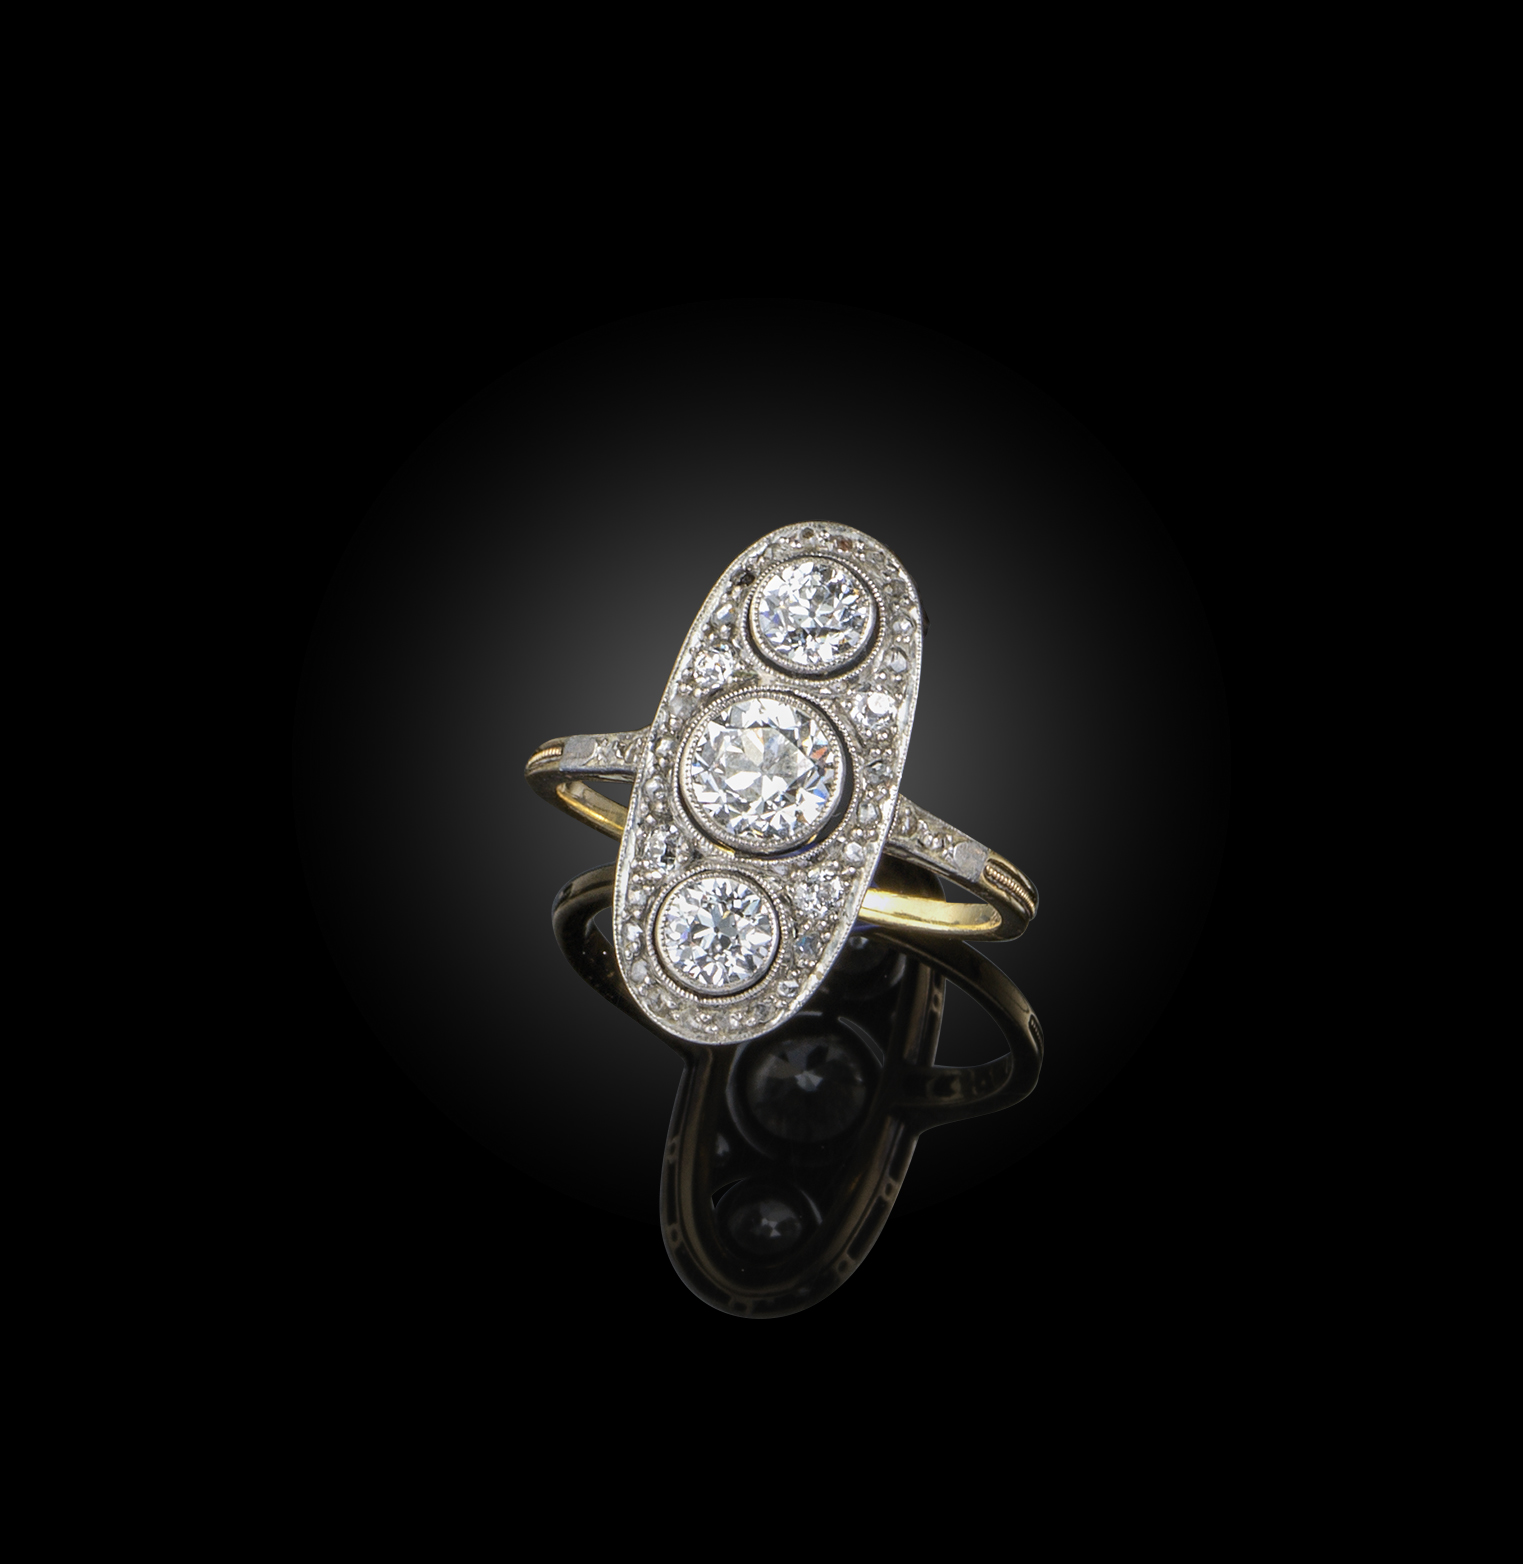 An Edwardian diamond ring, early 20th century, set with a line of circular-cut diamonds in